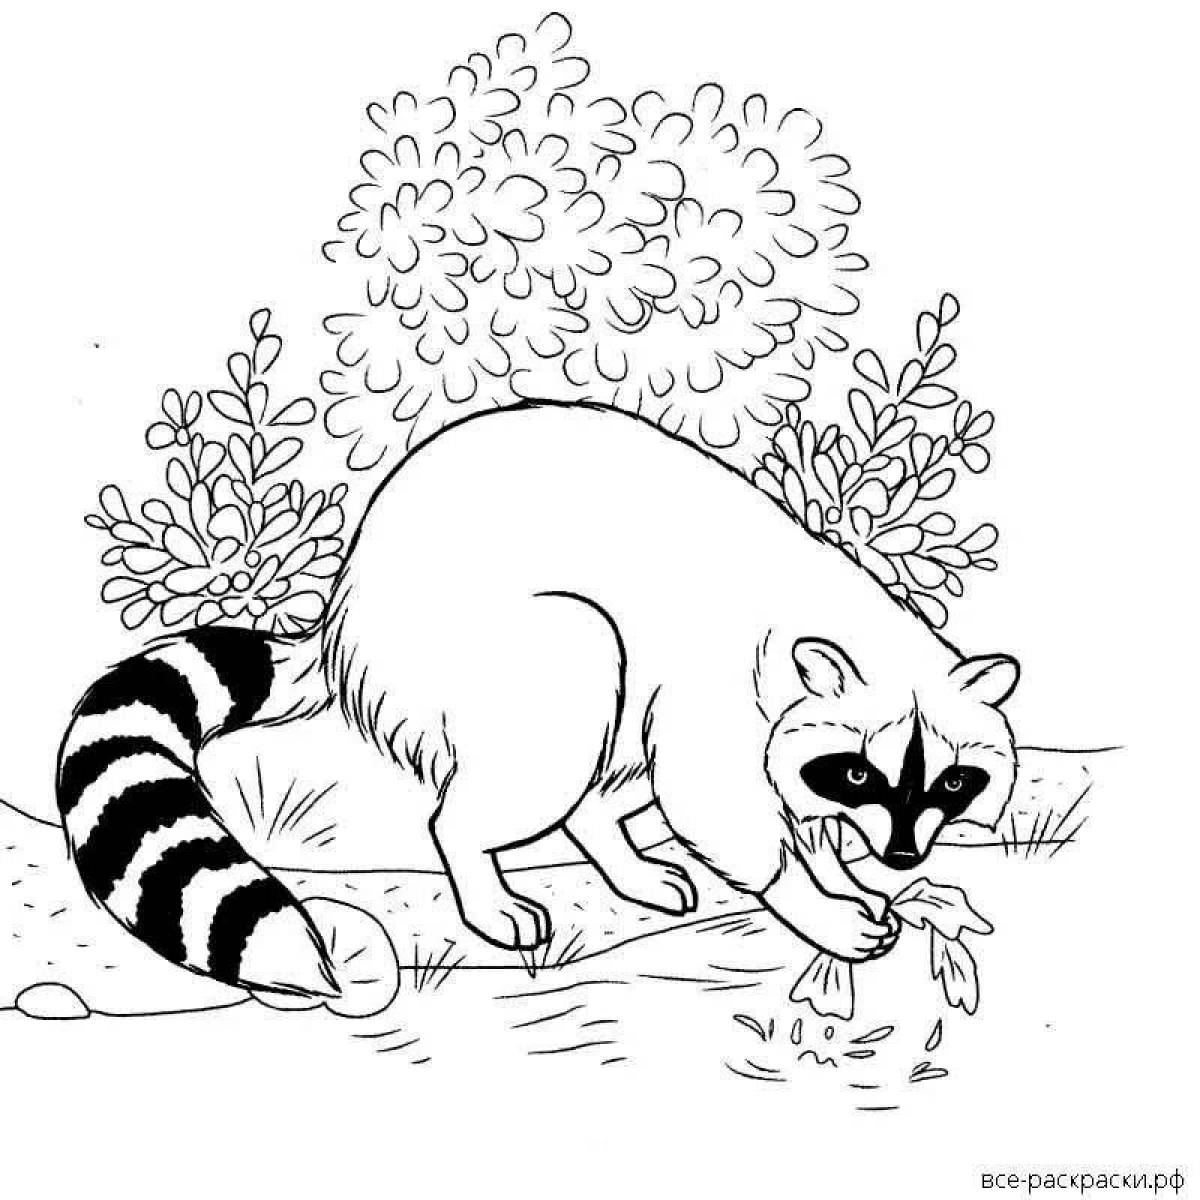 Naughty raccoon coloring page